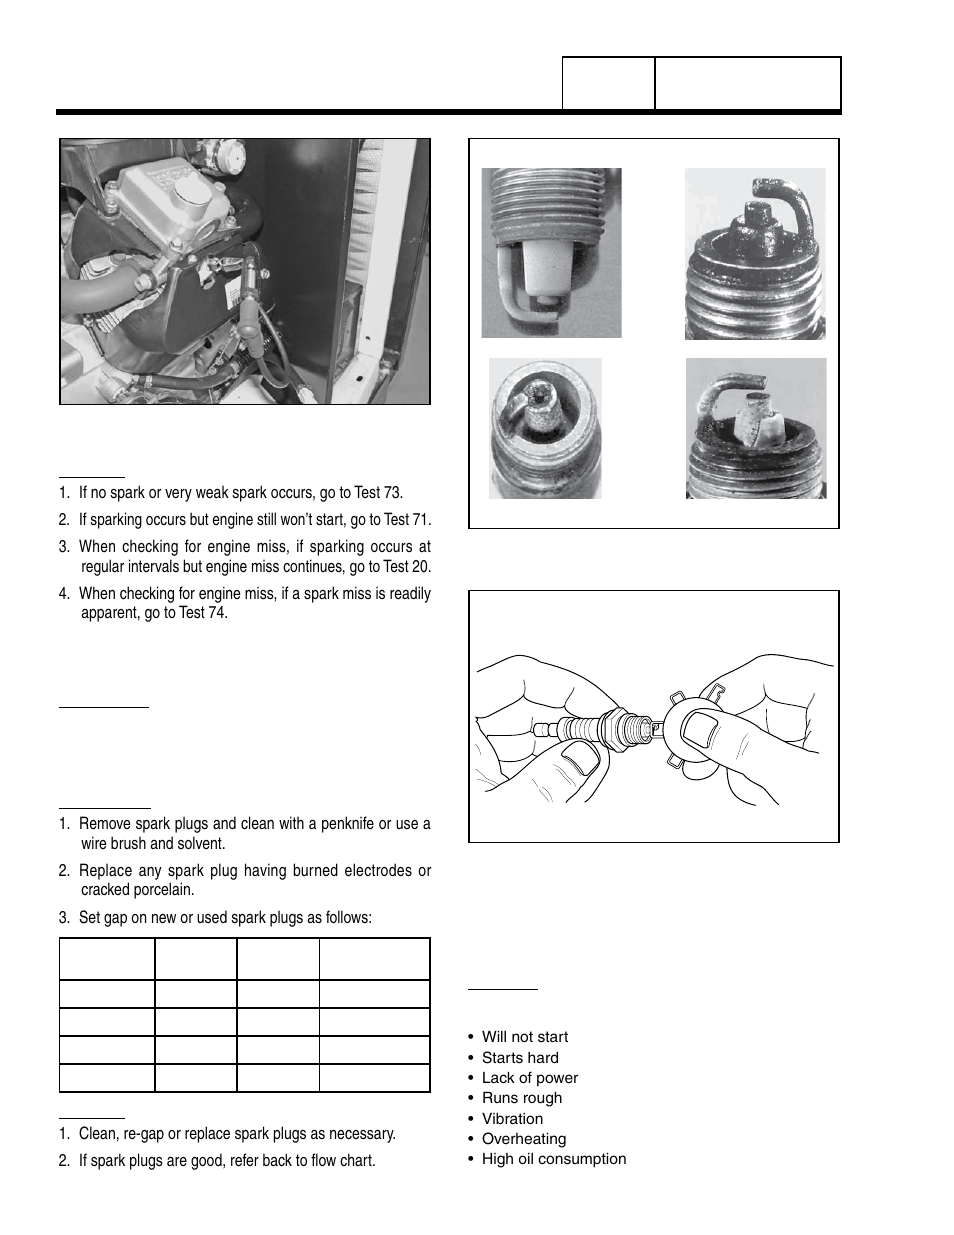 Test 71 – check spark plugs | Generac Power Systems 8 kW LP User Manual |  Page 138 / 192